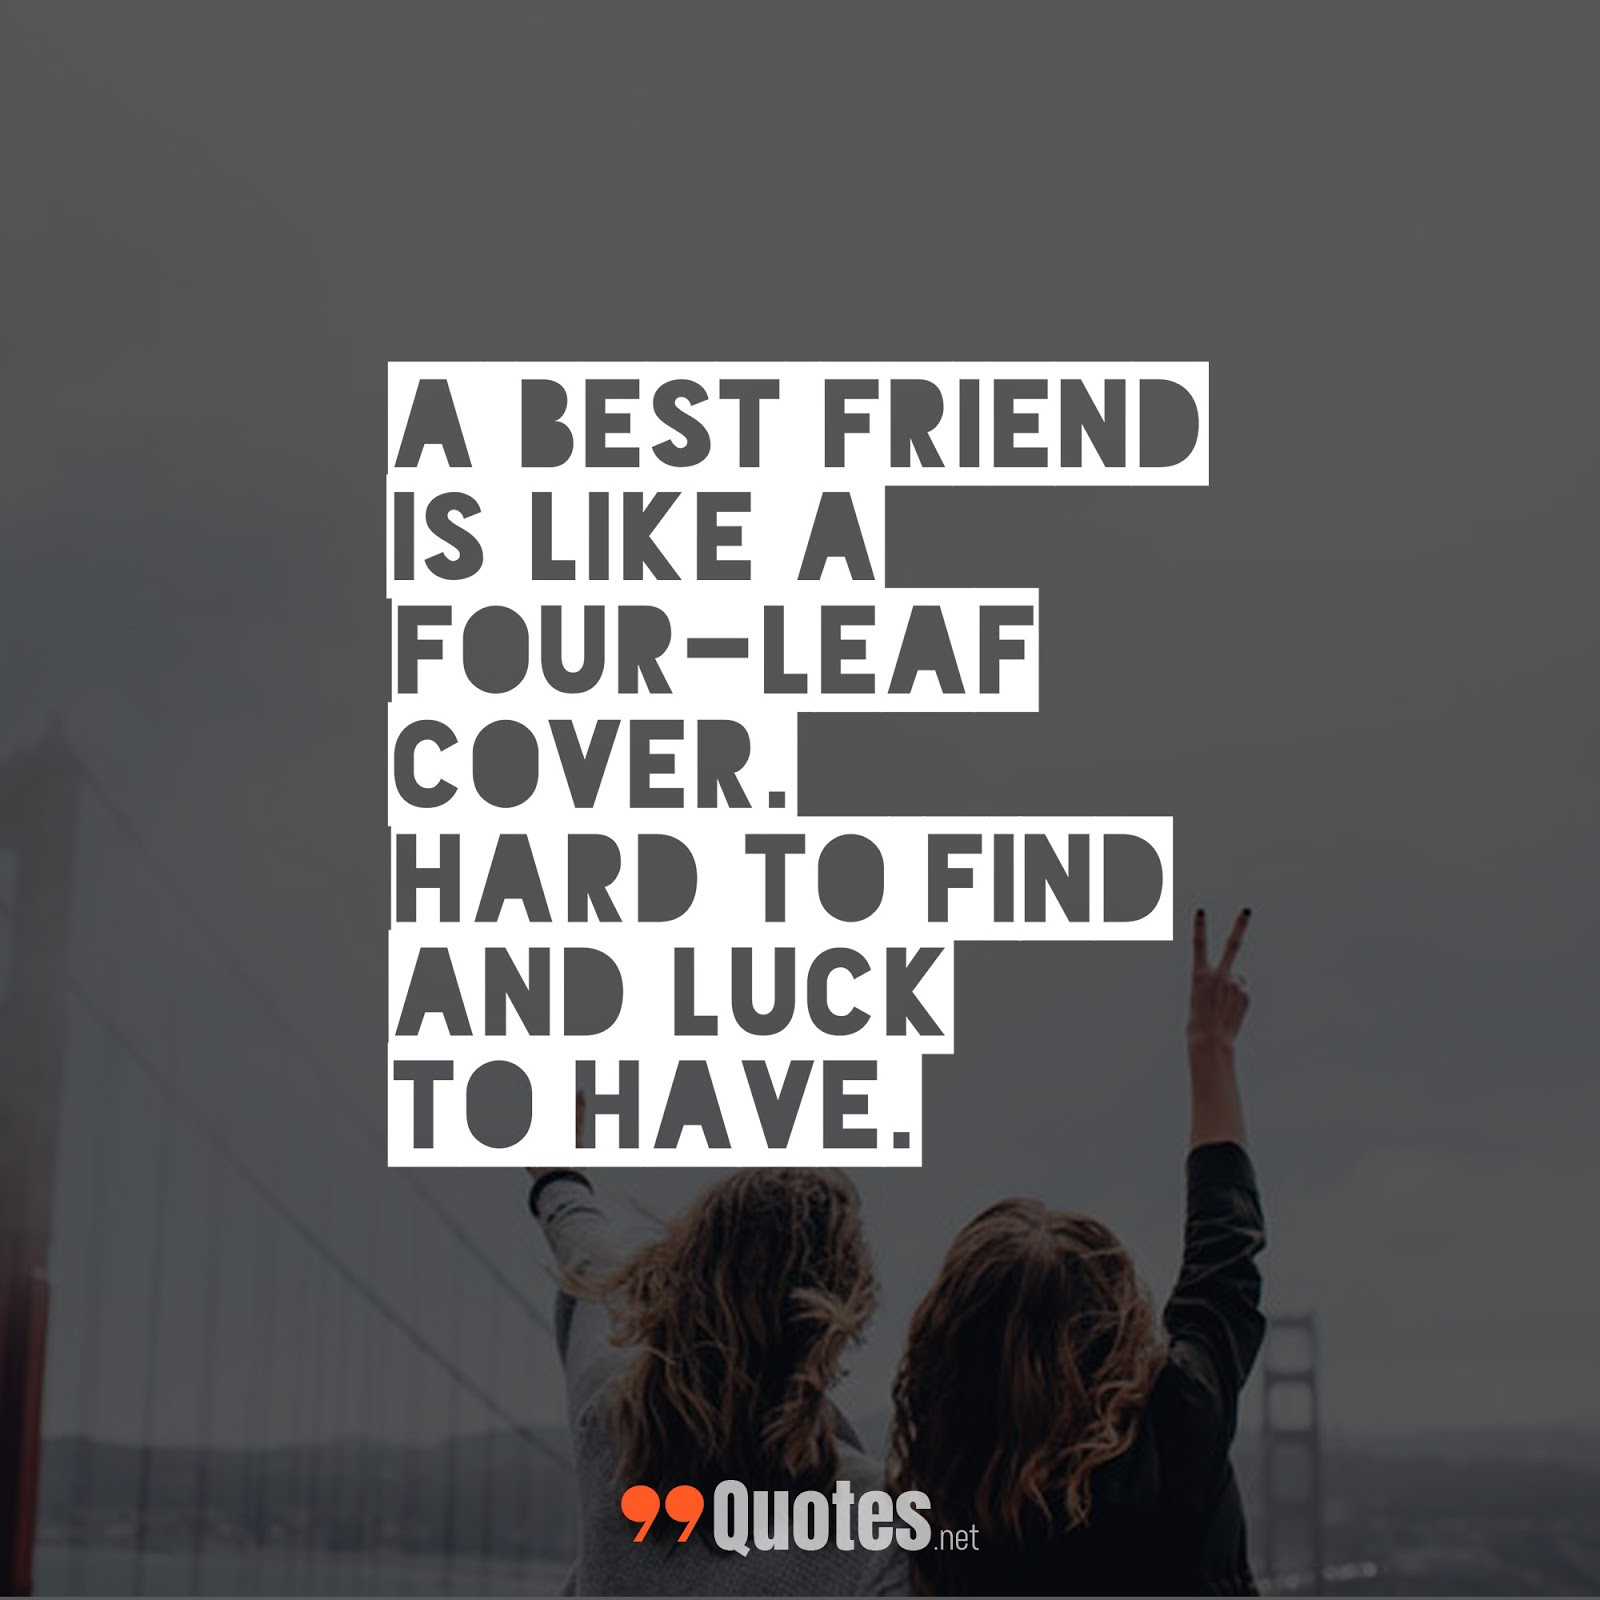 Short And Sweet Friendship Quotes
 99 Cute Short Friendship Quotes You Will Love [with images]